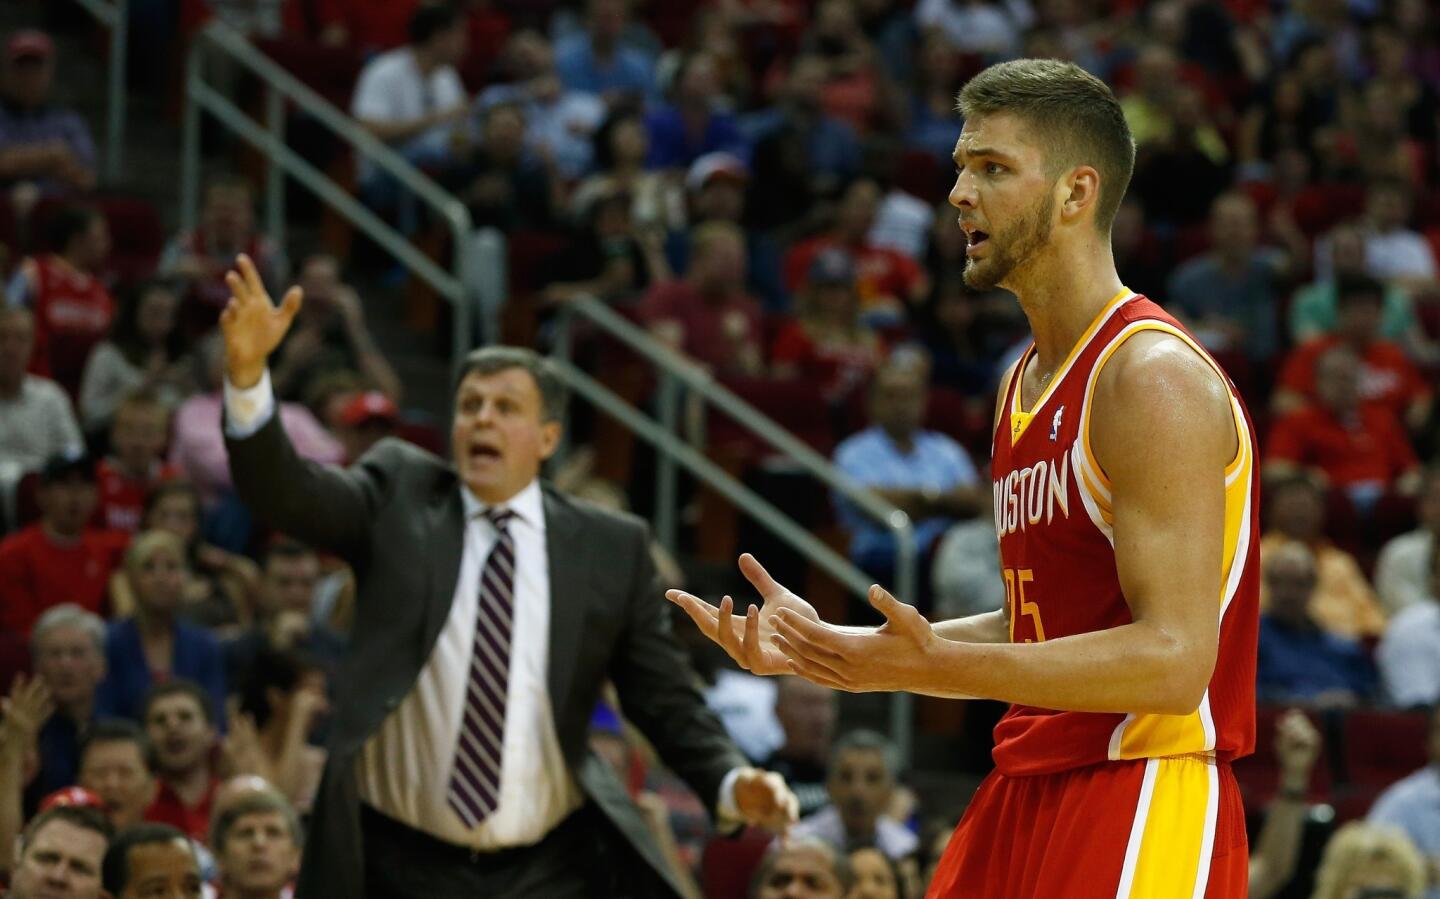 Kevin McHale, Chandler Parsons